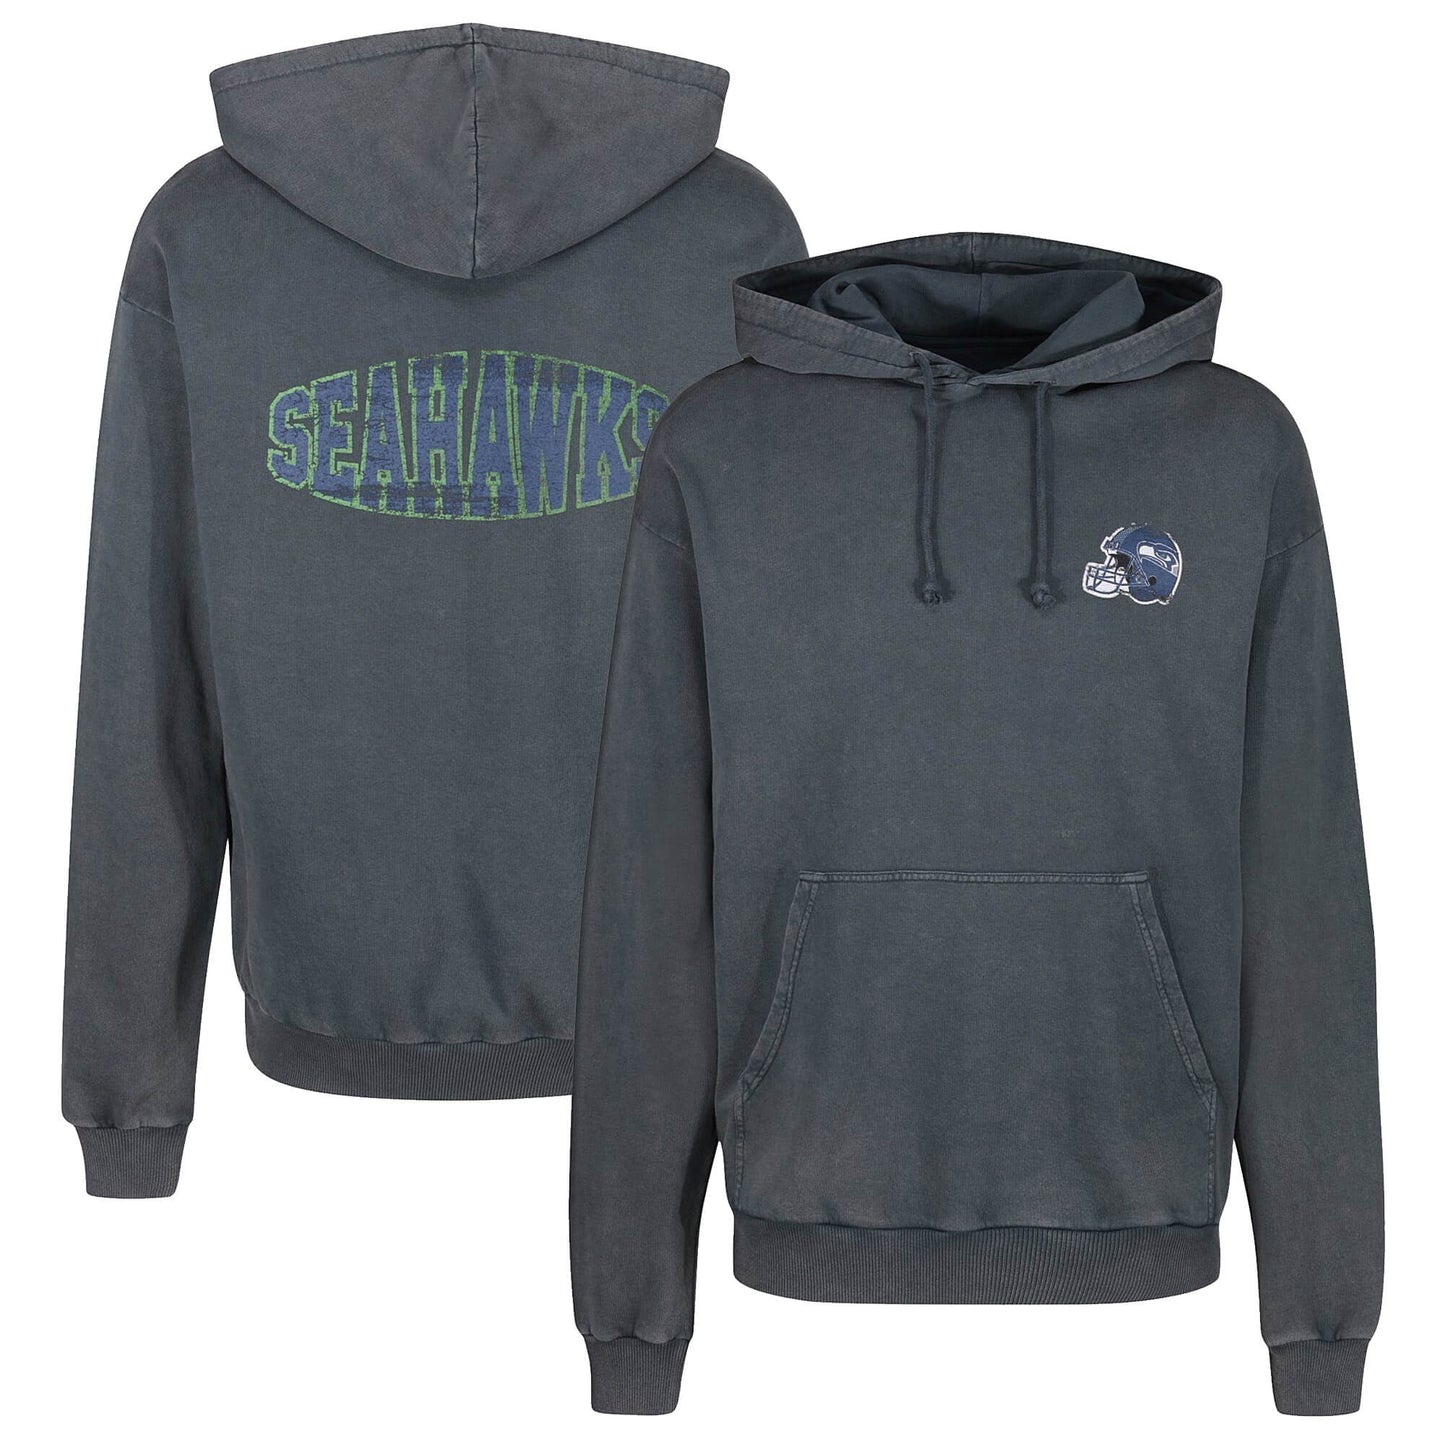 Re:Covered NFL Helmet Chest / College Backprint Hoody Seattle Seahawks Washed Black